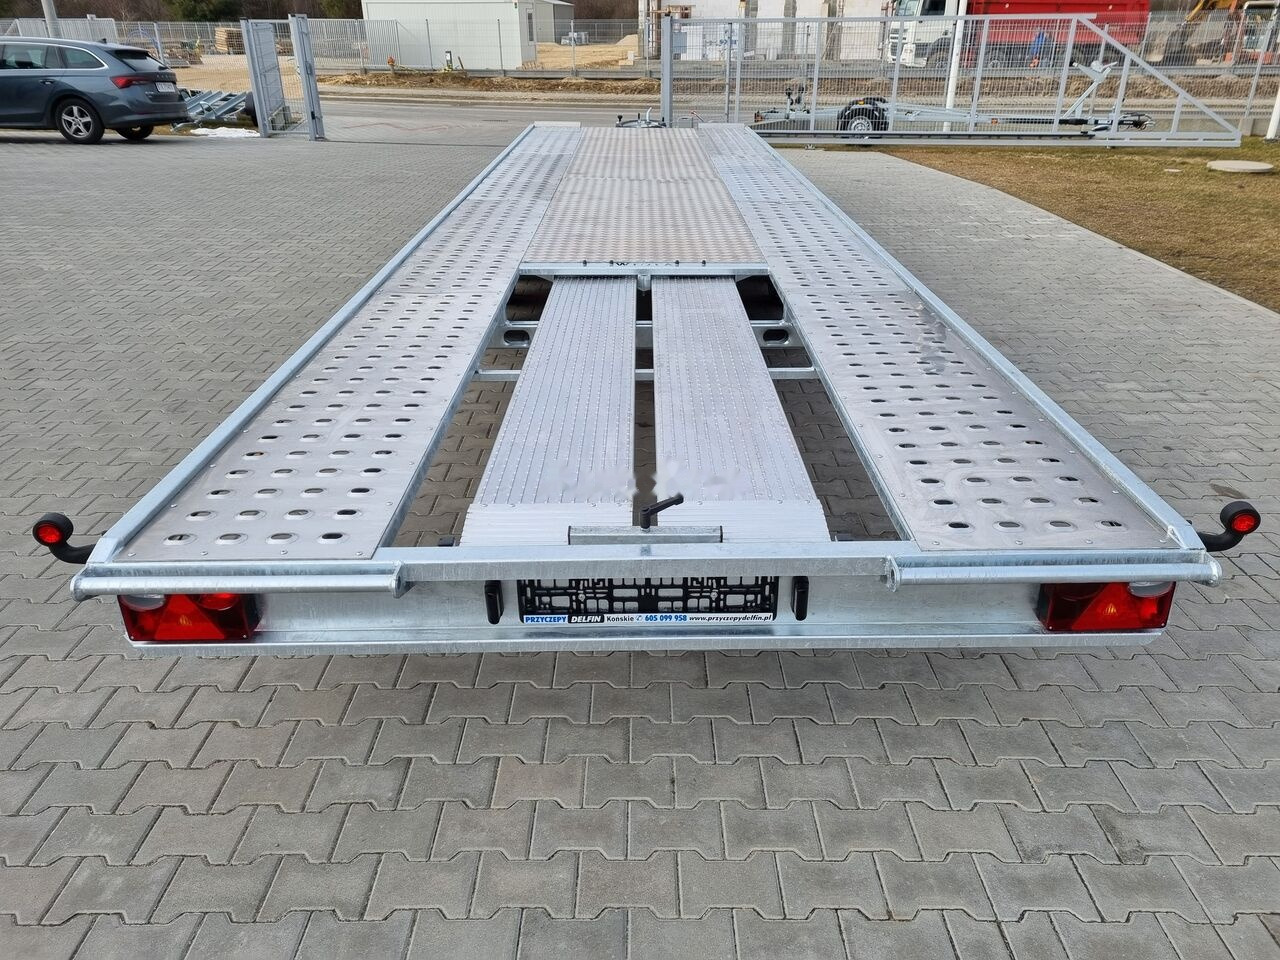 Remorque porte-voitures neuf Wiola L35G85 8.5m long trailer with 3 axles for transport of 2 cars: photos 34